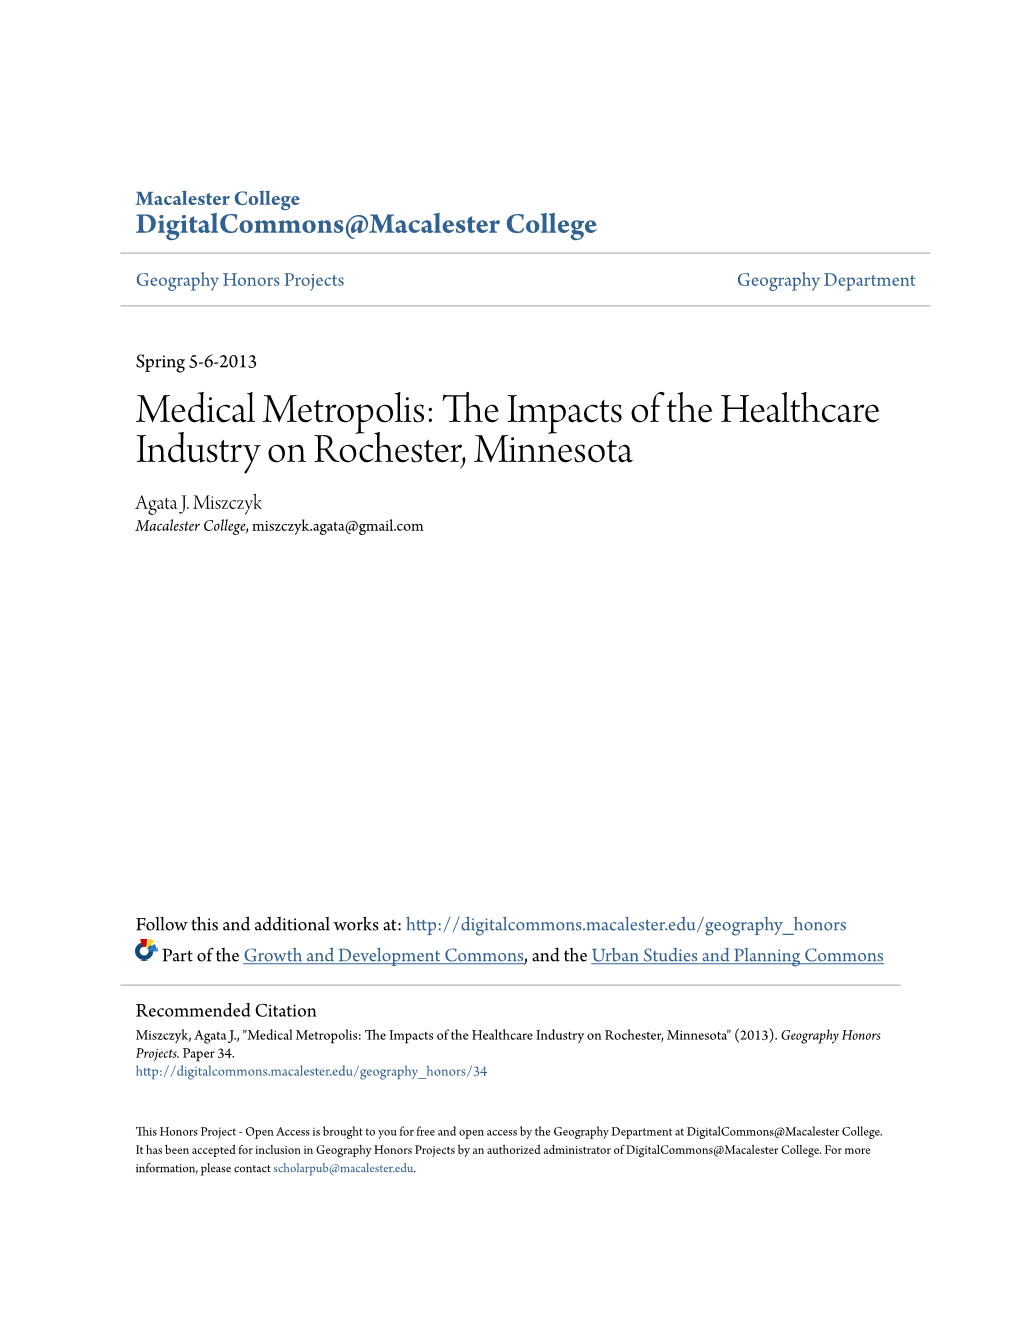 The Impacts of the Healthcare Industry on Rochester, Minnesota